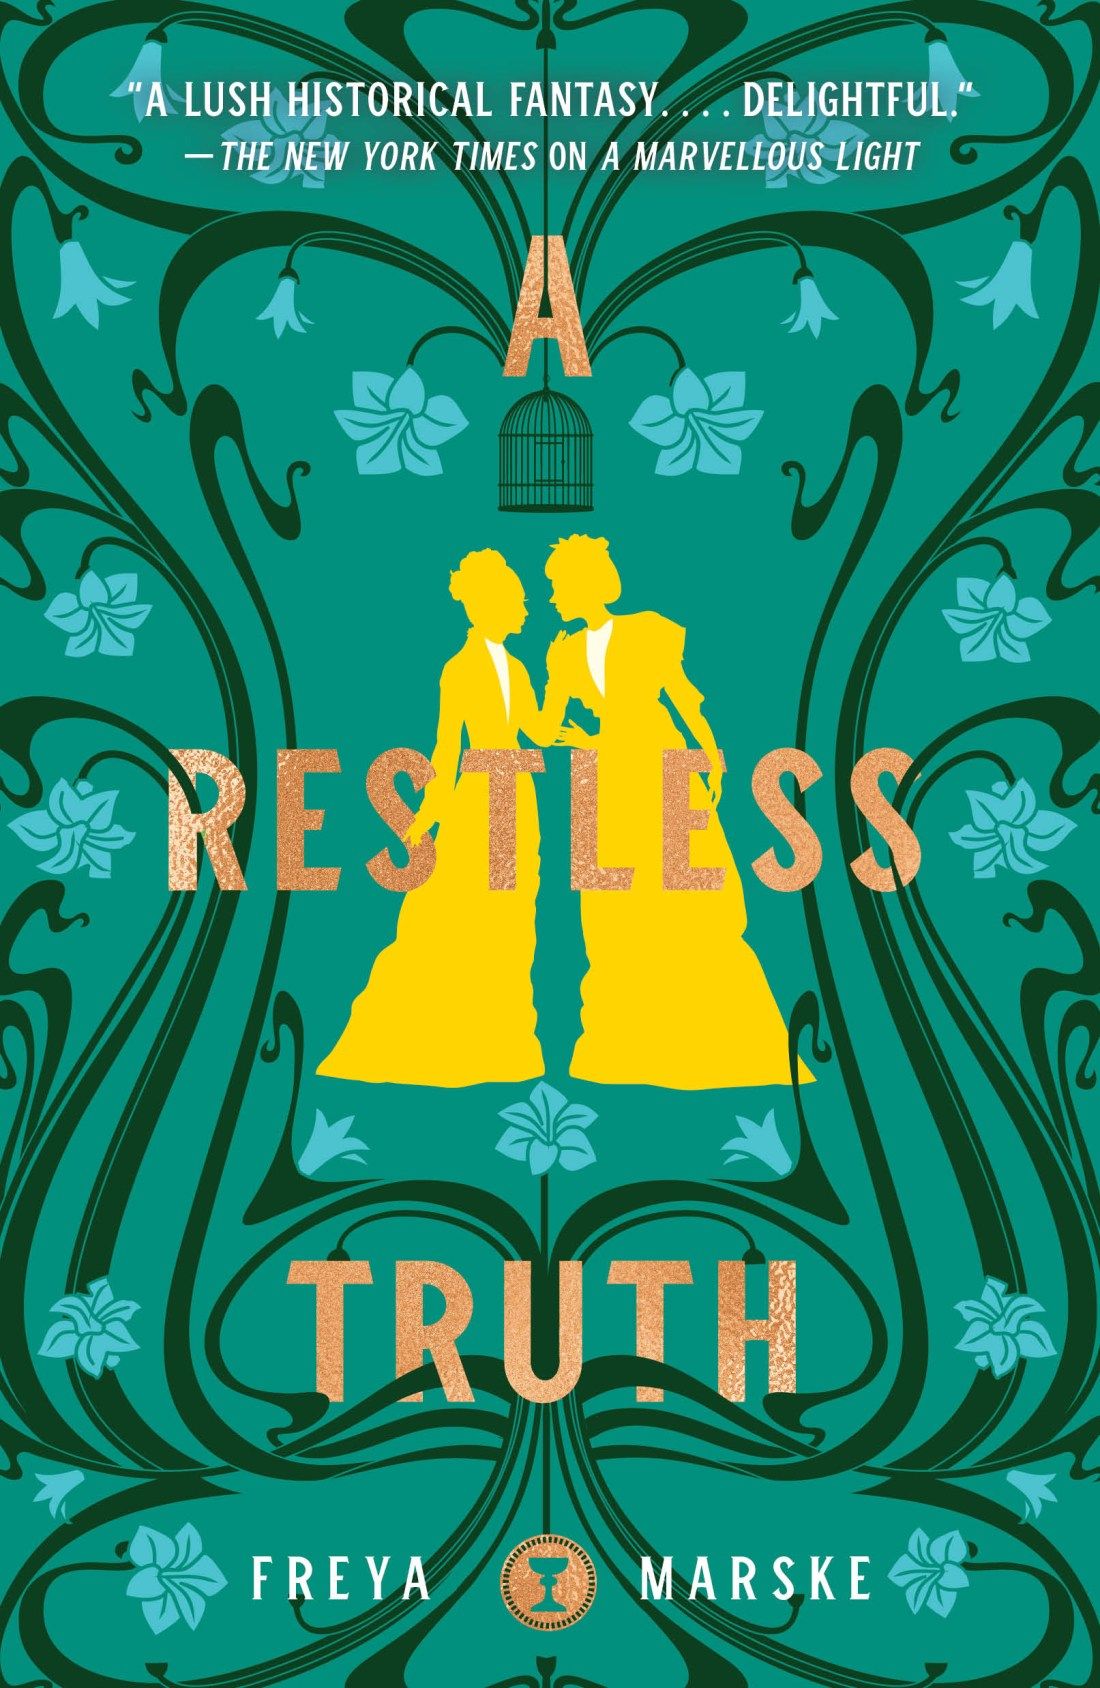 A Restless Truth cover